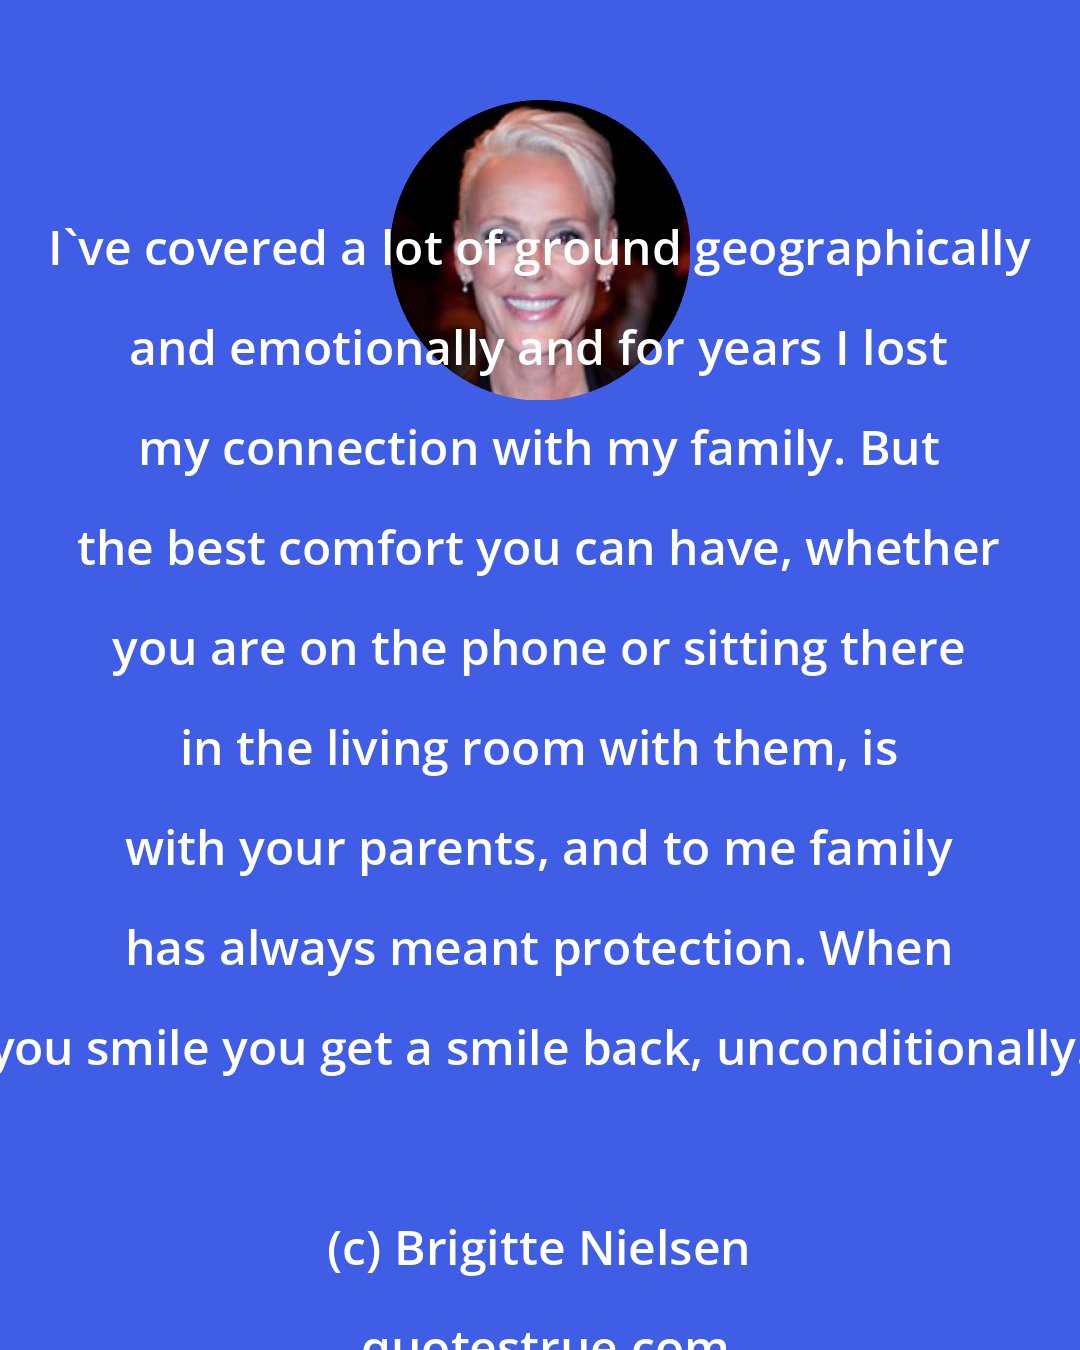 Brigitte Nielsen: I've covered a lot of ground geographically and emotionally and for years I lost my connection with my family. But the best comfort you can have, whether you are on the phone or sitting there in the living room with them, is with your parents, and to me family has always meant protection. When you smile you get a smile back, unconditionally.